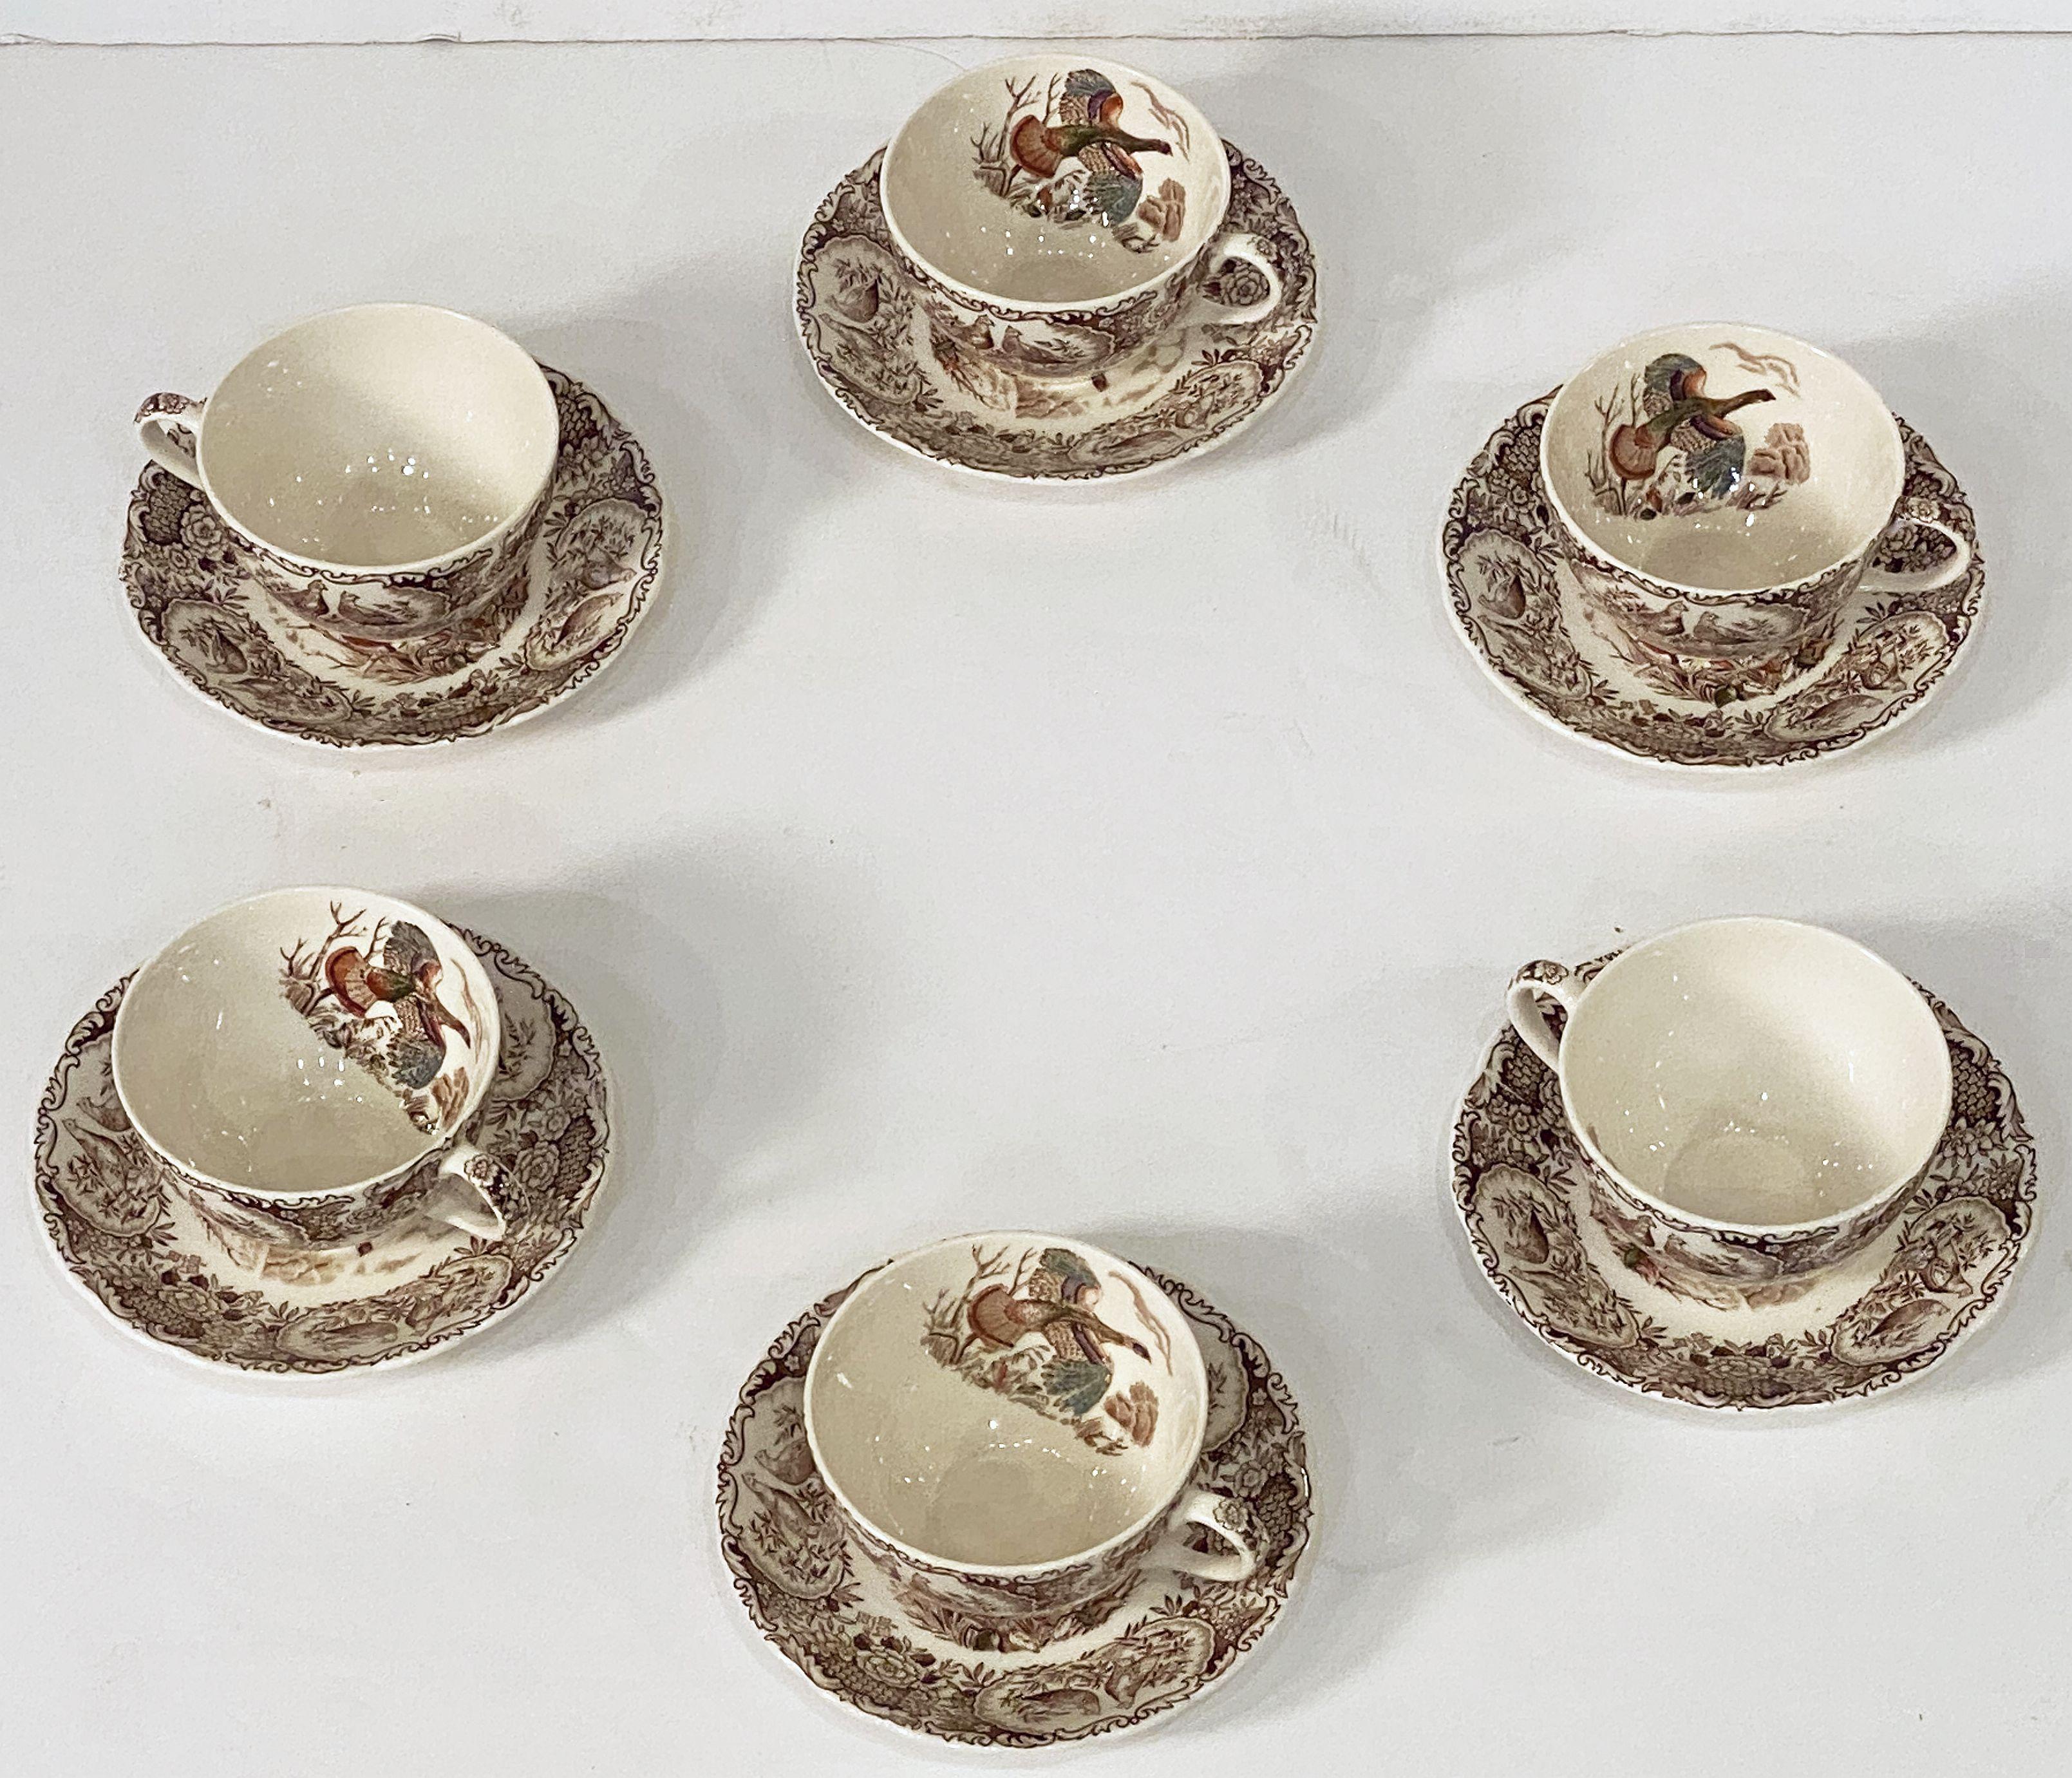 A set of six cups and saucers featuring the Wild Turkey - Flying brown and white transfer-ware pattern by the celebrated English pottery firm, Johnson Brothers.

With authentic midcentury brown label on reverse - preferred by